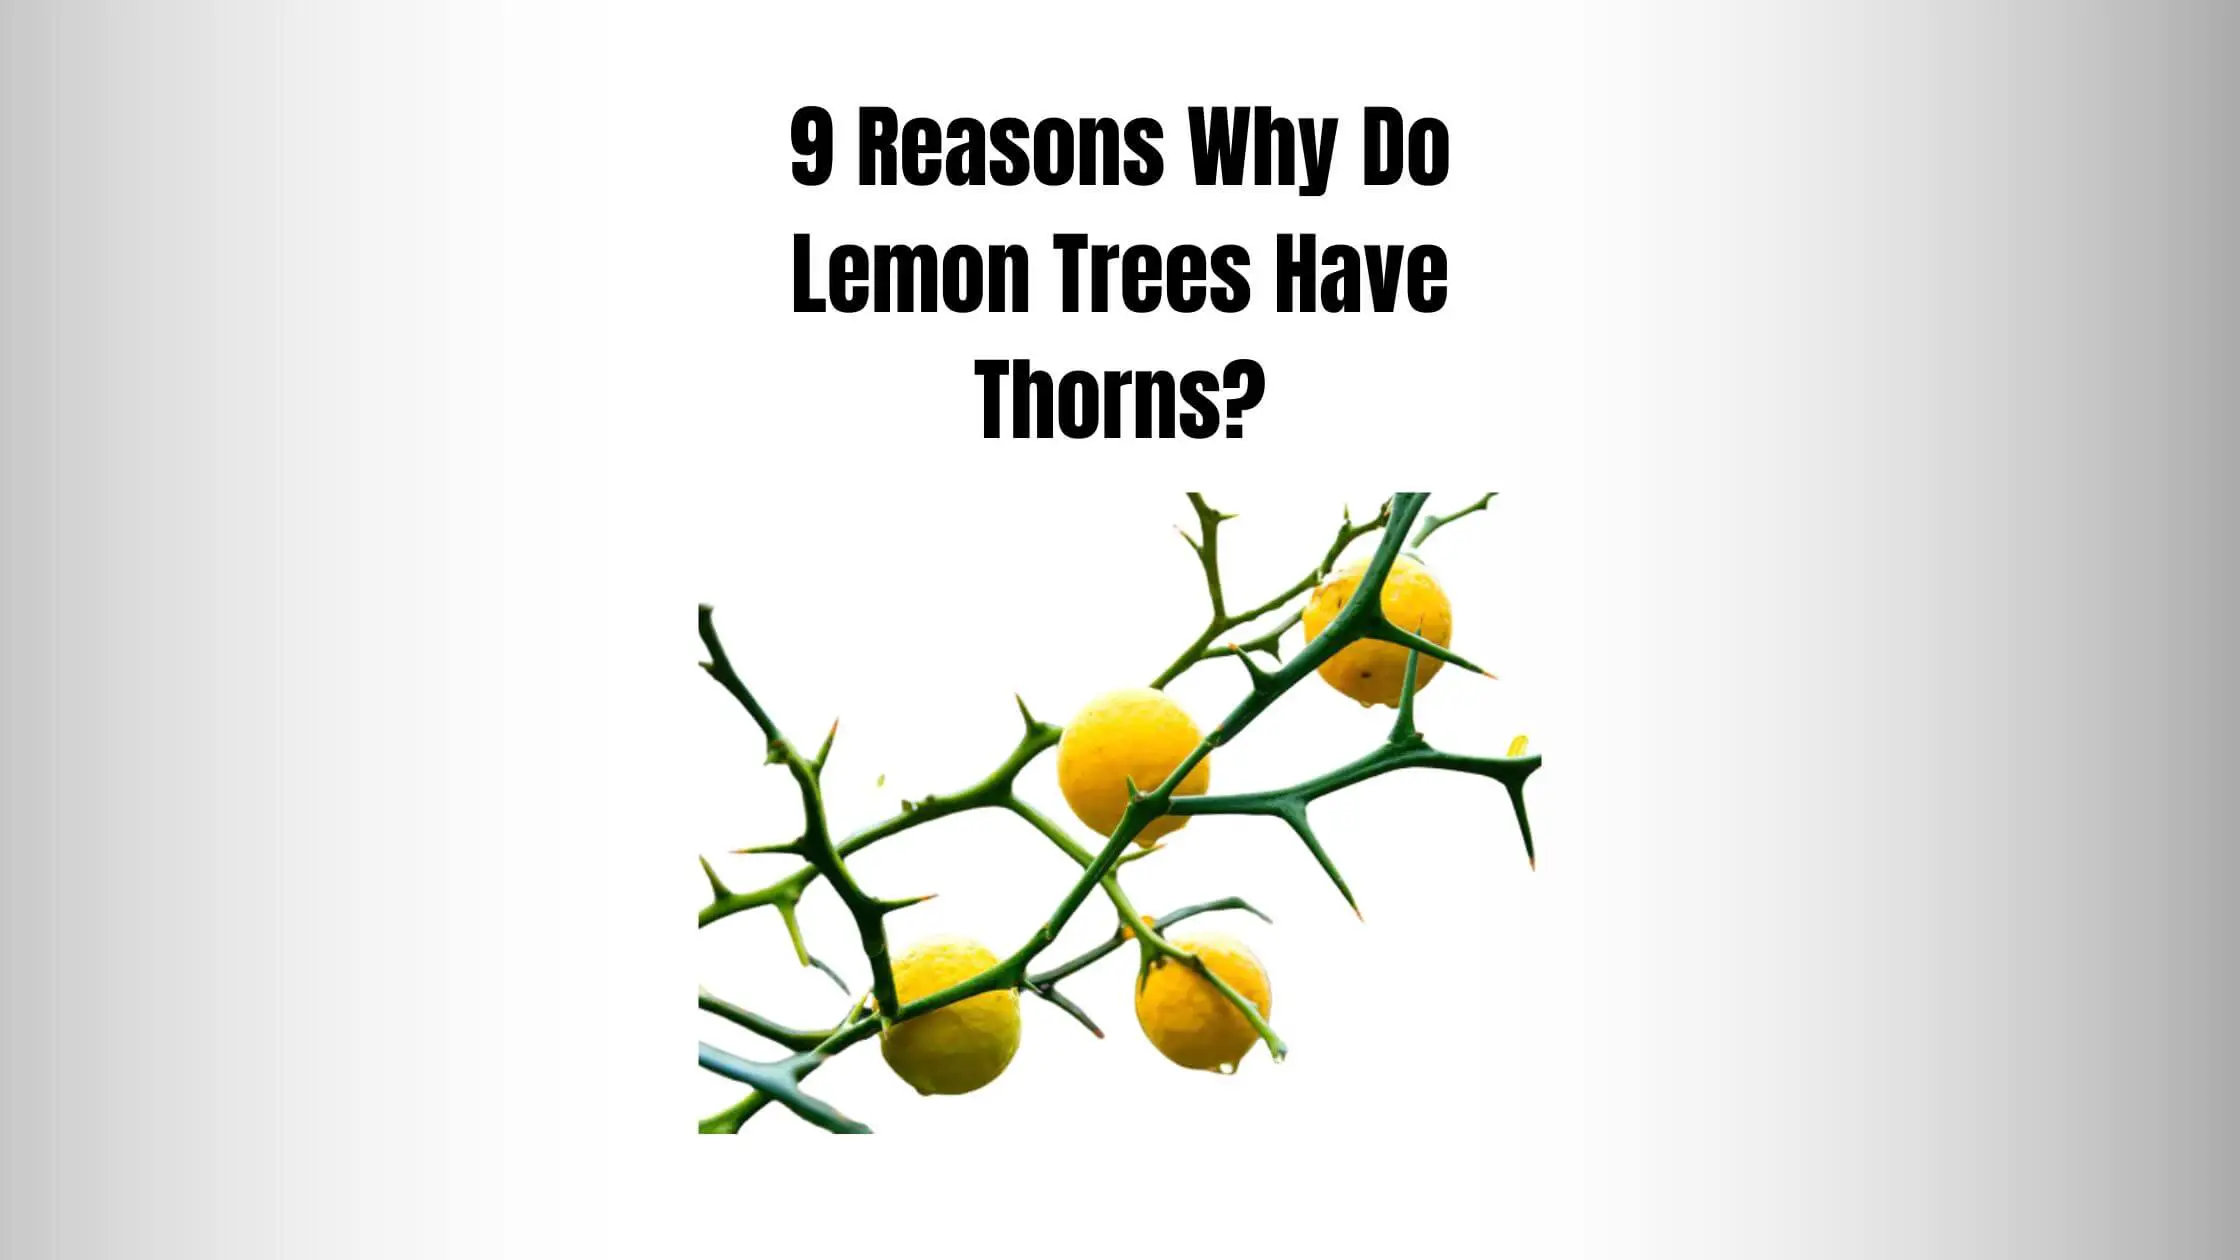 9 Reasons Why Do Lemon Trees Have Thorns?